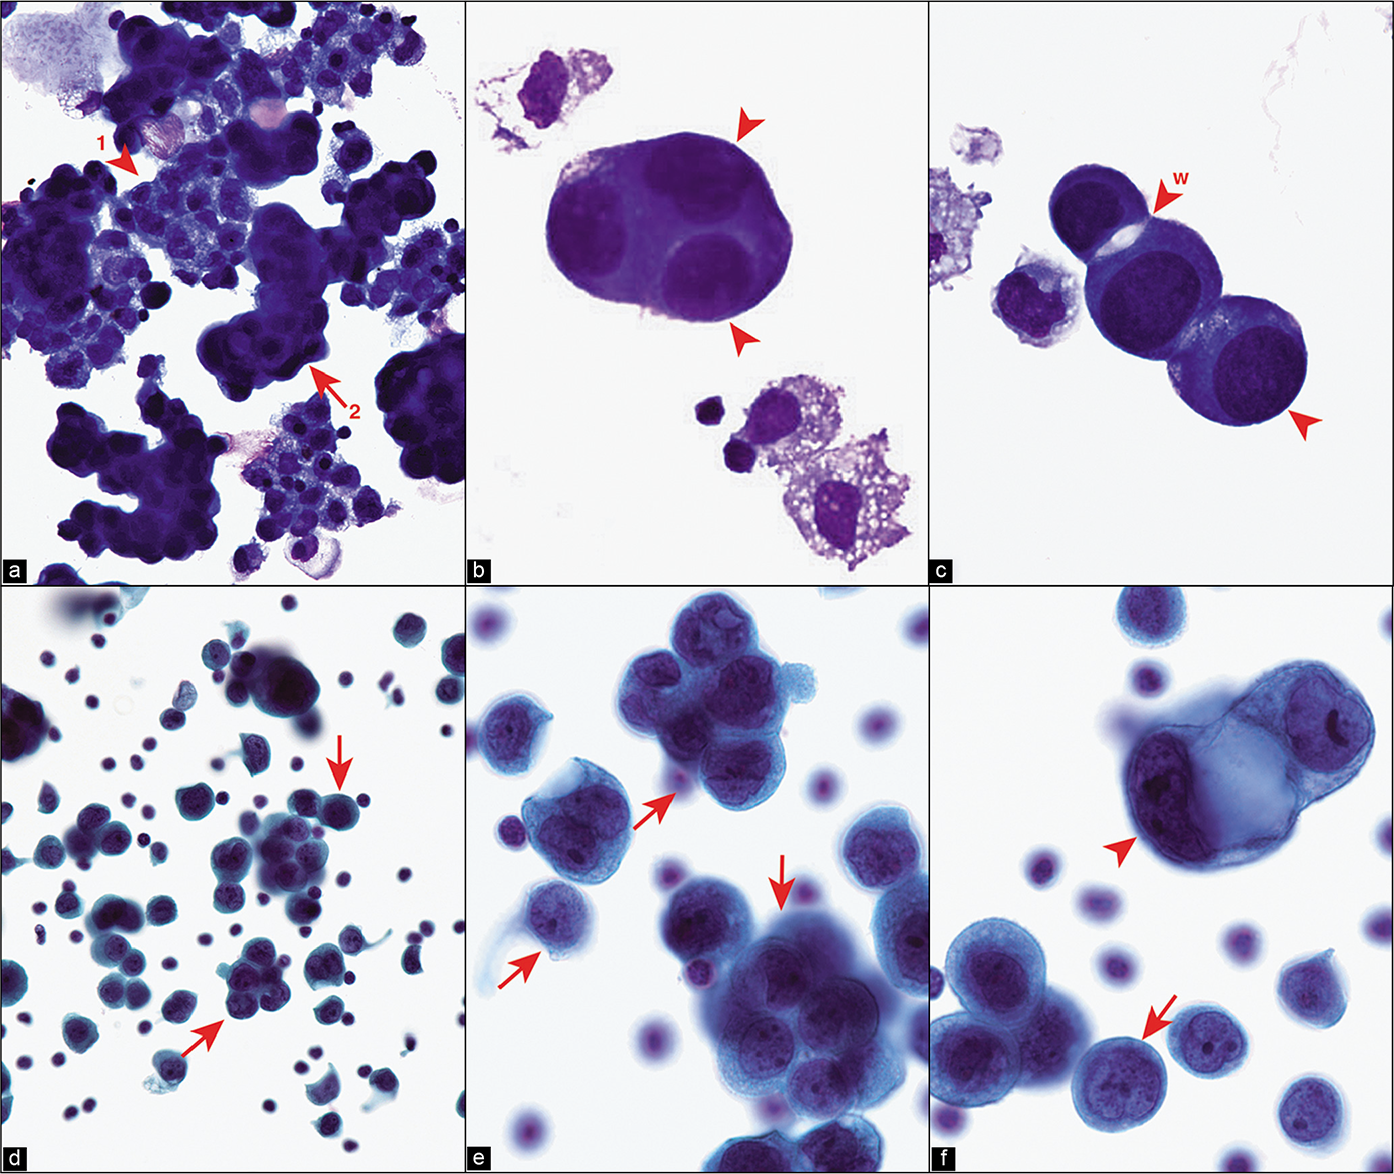 Metastatic poorly differentiated adenocarcinoma of lung, pleural fluid. The DQ-stained preparation (a) demonstrates reactive mesothelial cells (arrowhead 1 in a) mixed with a ‘second population’ of cohesive groups of cells (arrow 2 in a) with eccentric nuclei that touch the periphery of the carcinoma cells (arrowheads in b,c,f). Some cells are less cohesive seen as scattered small groups or solitary carcinoma cells (arrows in d–f). Occasional intercellular spaces, resembling mesothelial windows may be present (arrowhead w in c). The patient had poorly differentiated adenocarcinoma of the lung. [a–c, DQ-stained Cytospin smear; d–f, PAP-stained SurePath smear (a, 10X; b,c, 100X; d, 10X; e,f, 100X).]